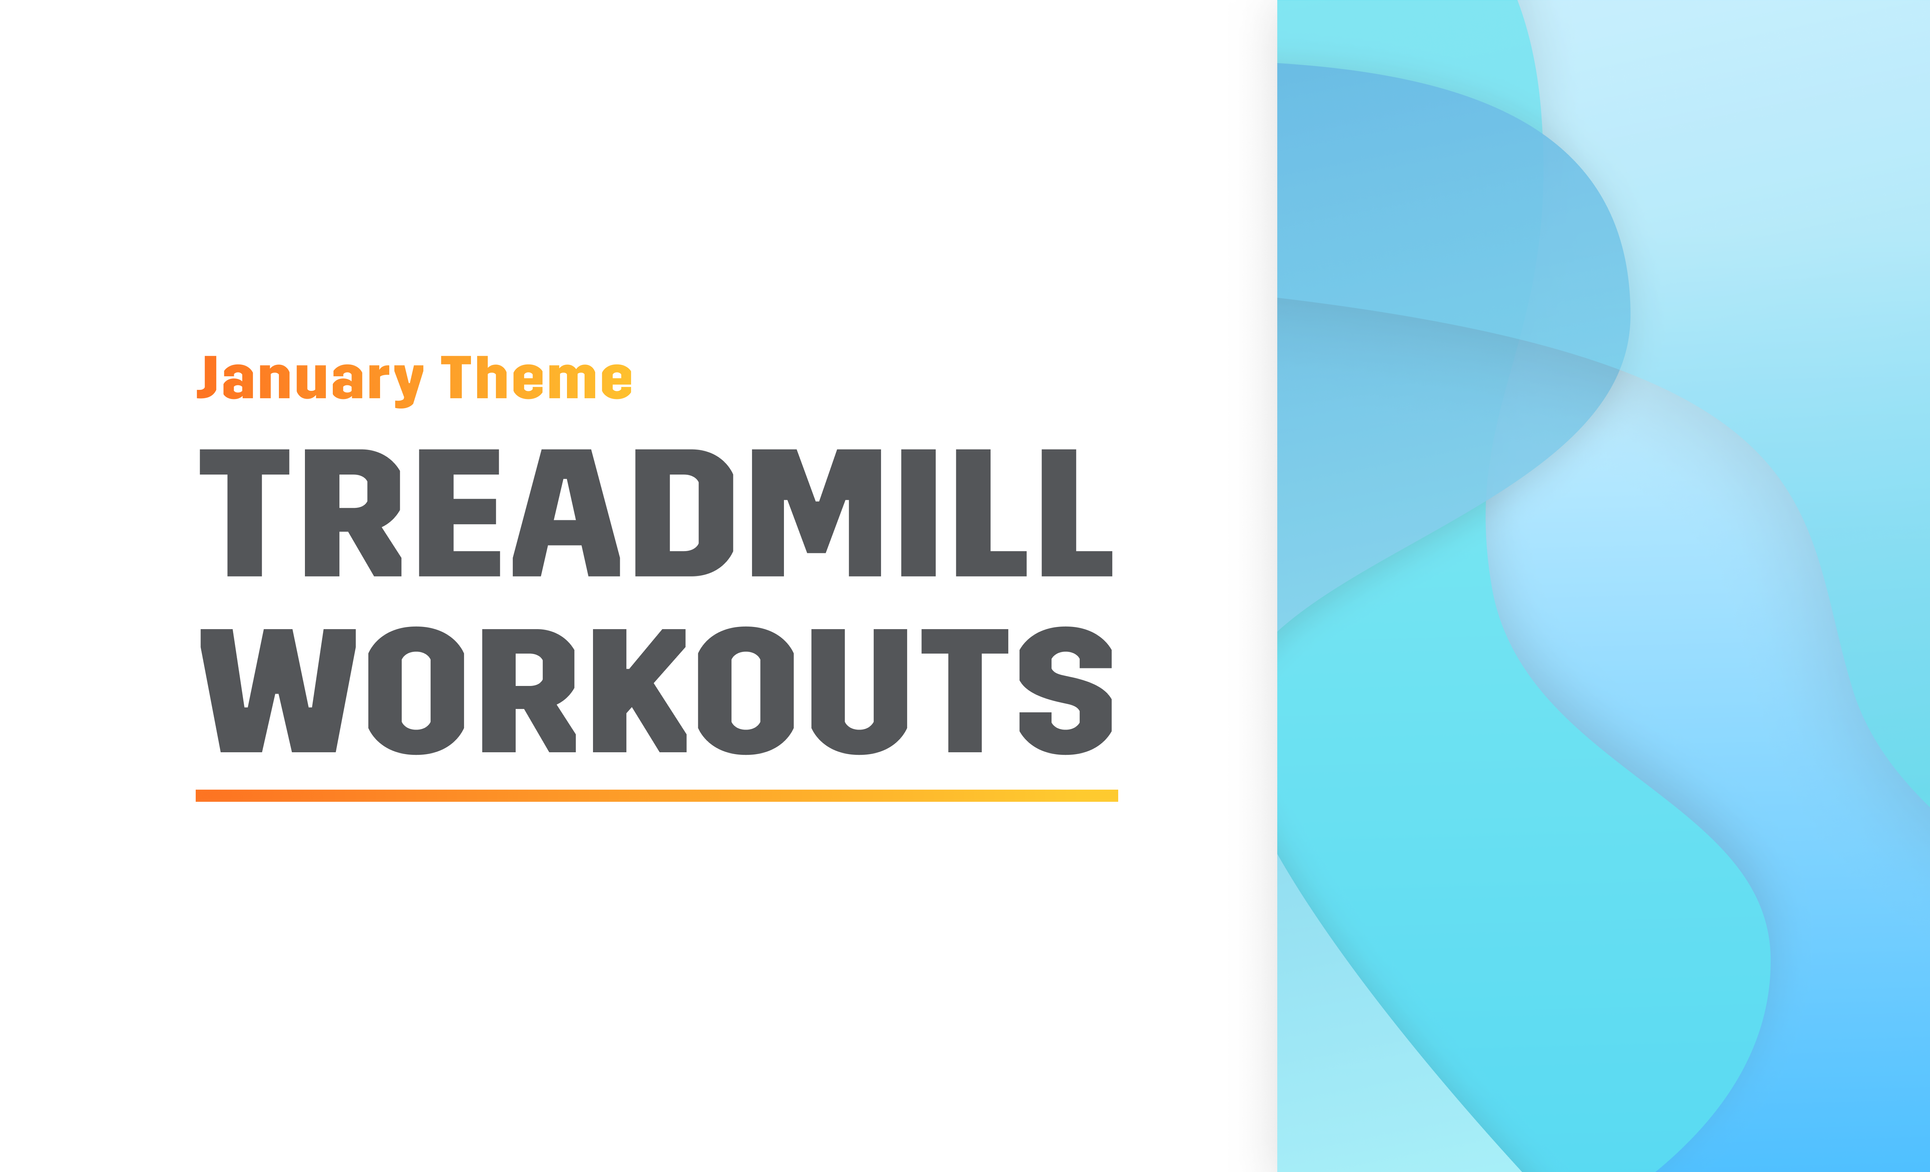 Step up your indoor training this winter with new treadmill workouts!